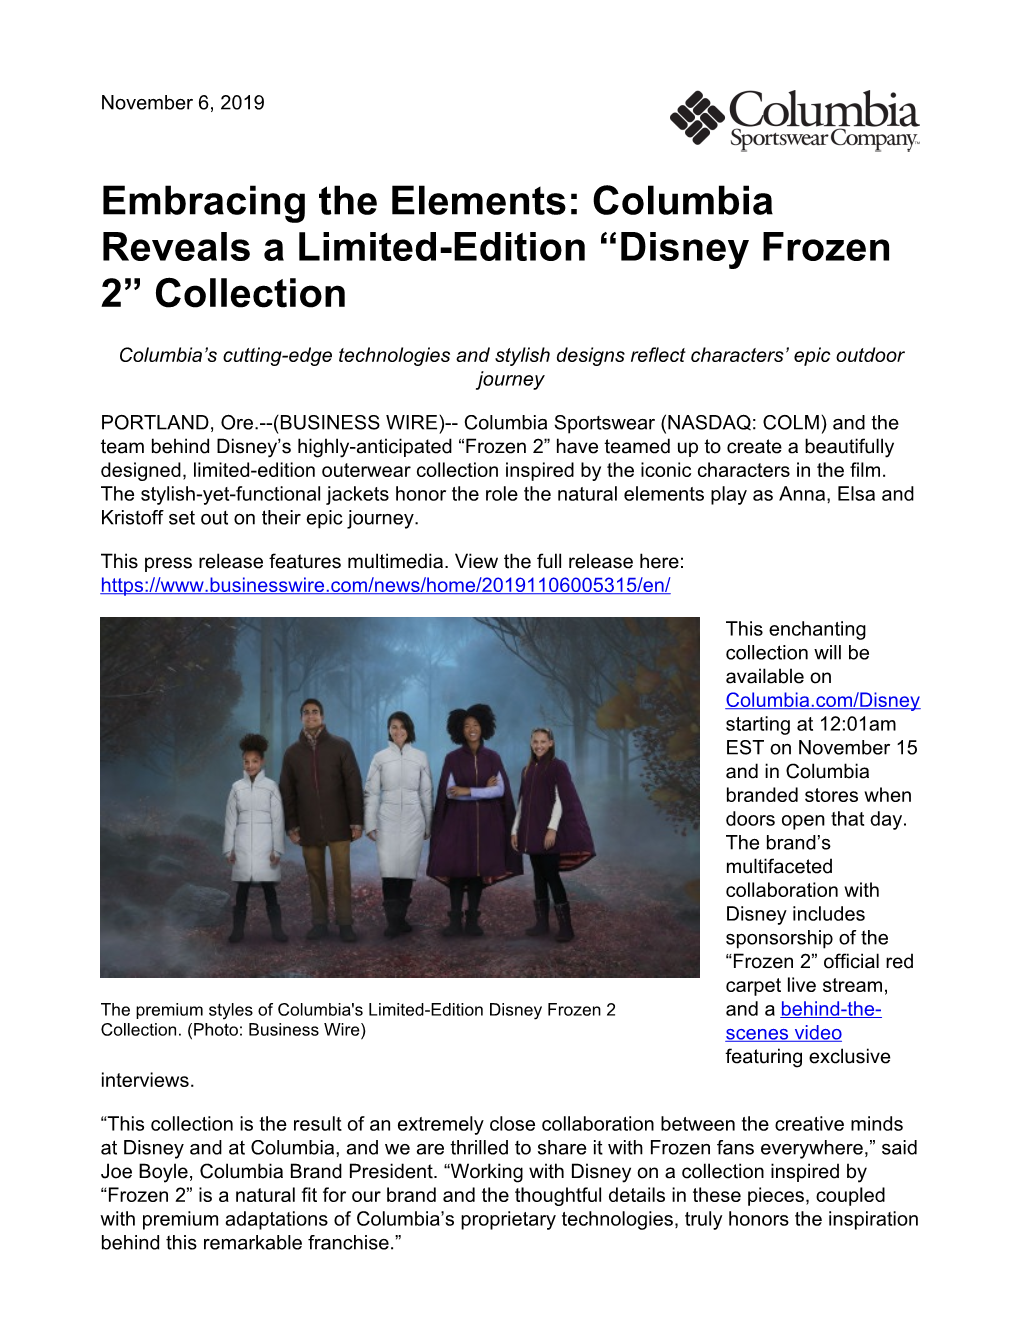 Embracing the Elements: Columbia Reveals a Limited-Edition “Disney Frozen 2” Collection